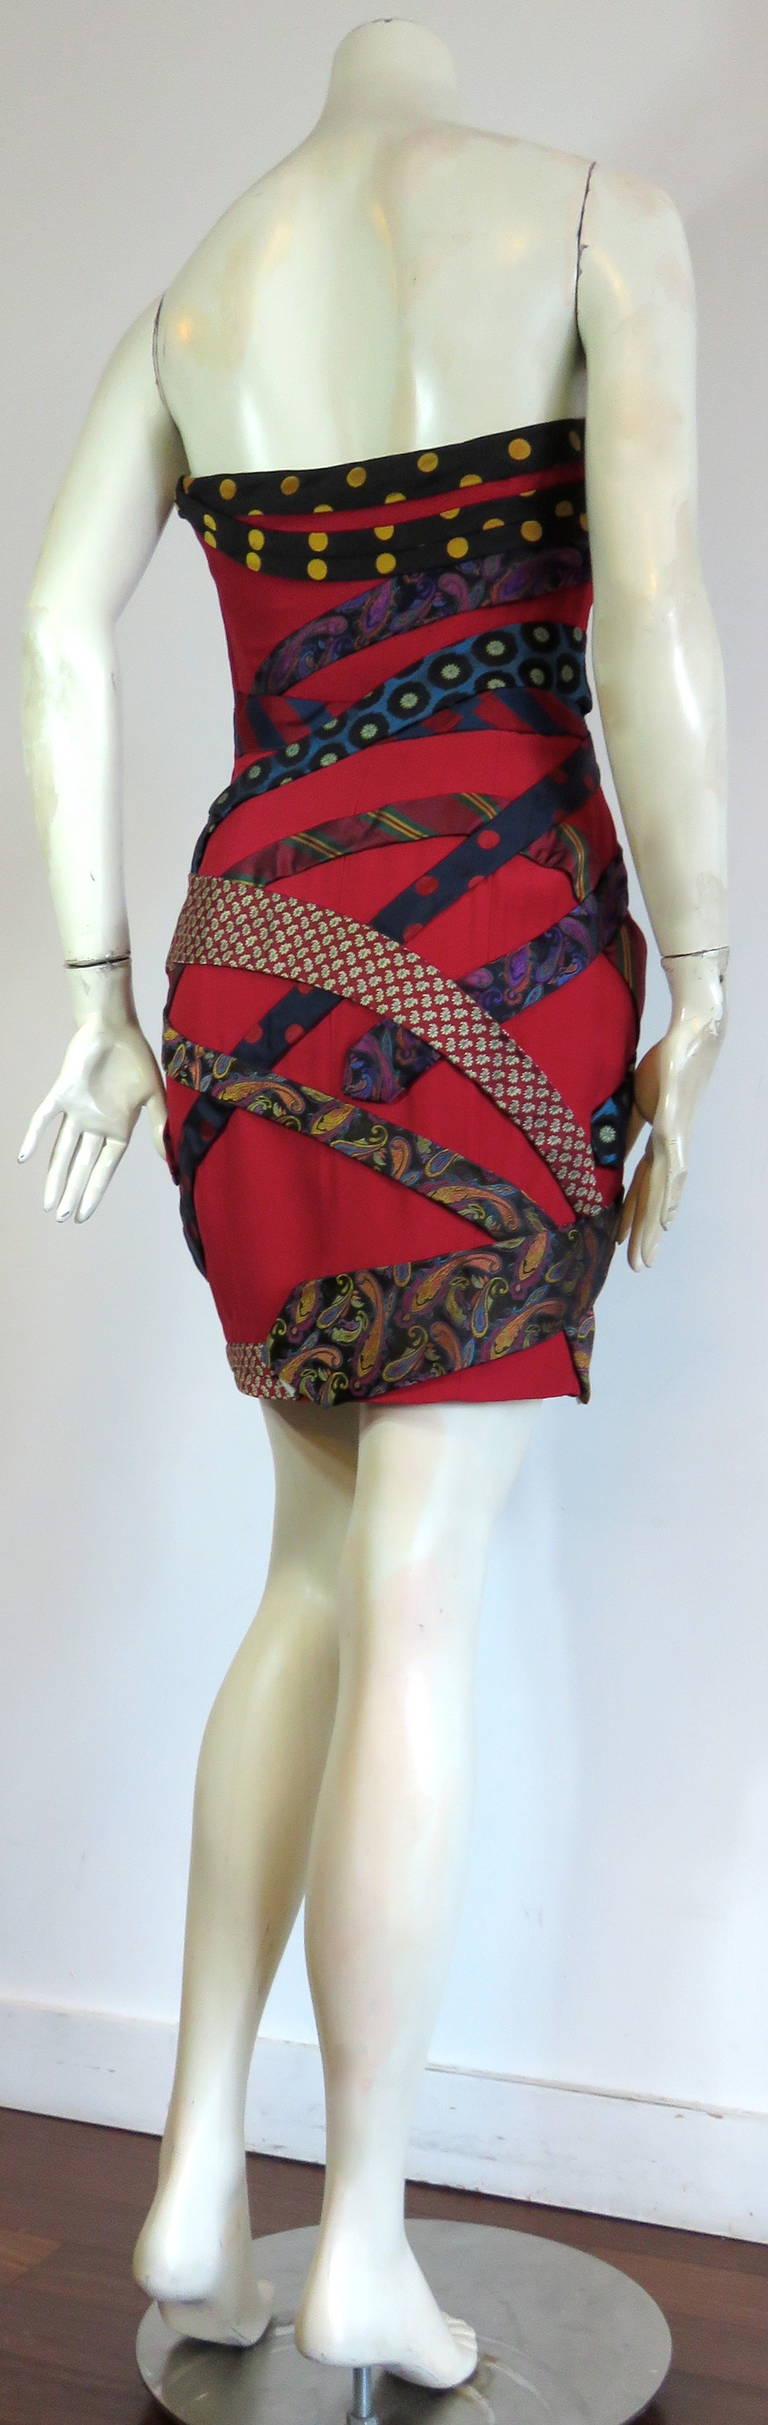 1980's MOSCHINO COUTURE Vintage silk tie dress For Sale 1